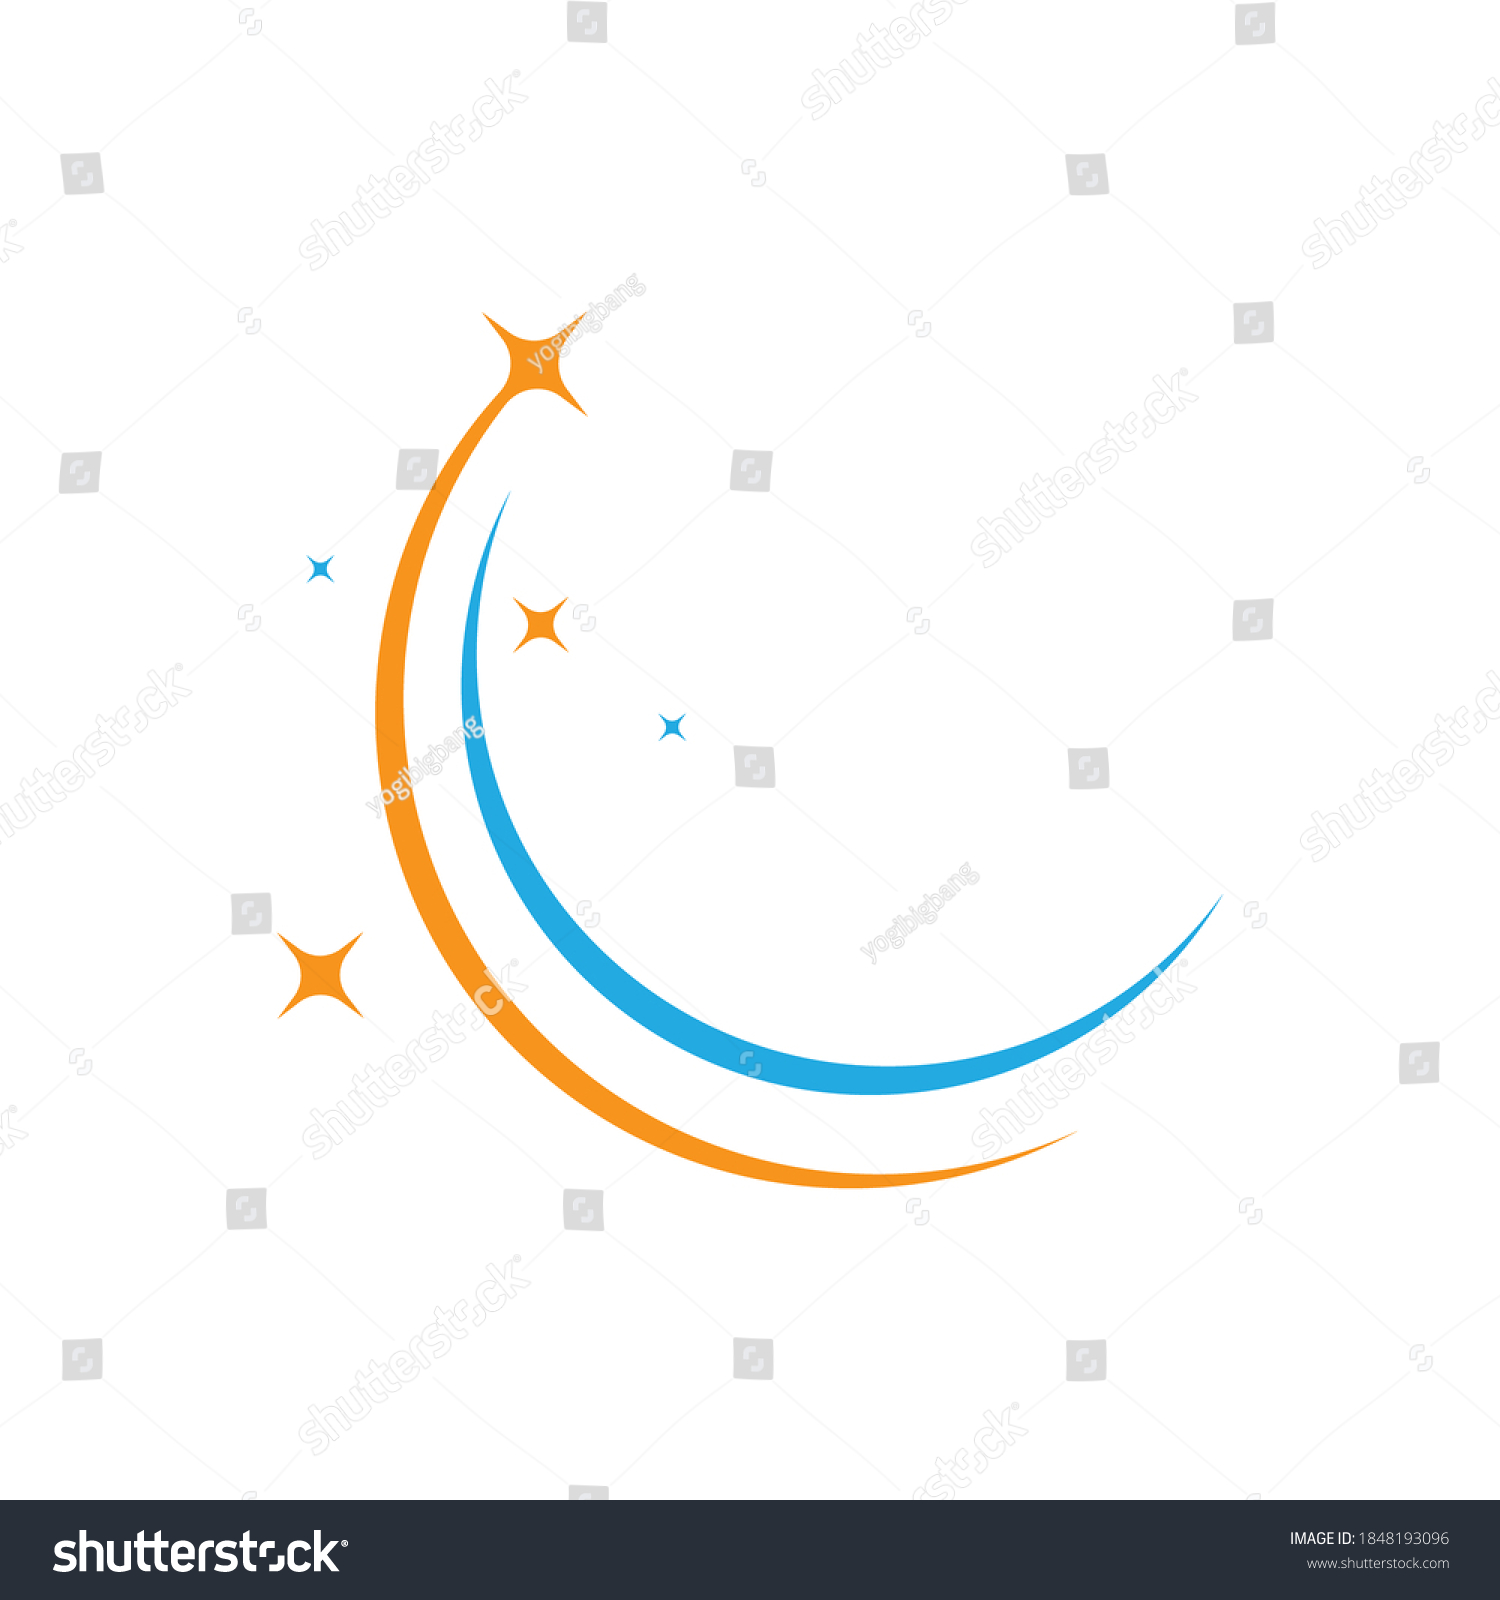 Star Logo Designs Template Fast Star Stock Vector (Royalty Free ...